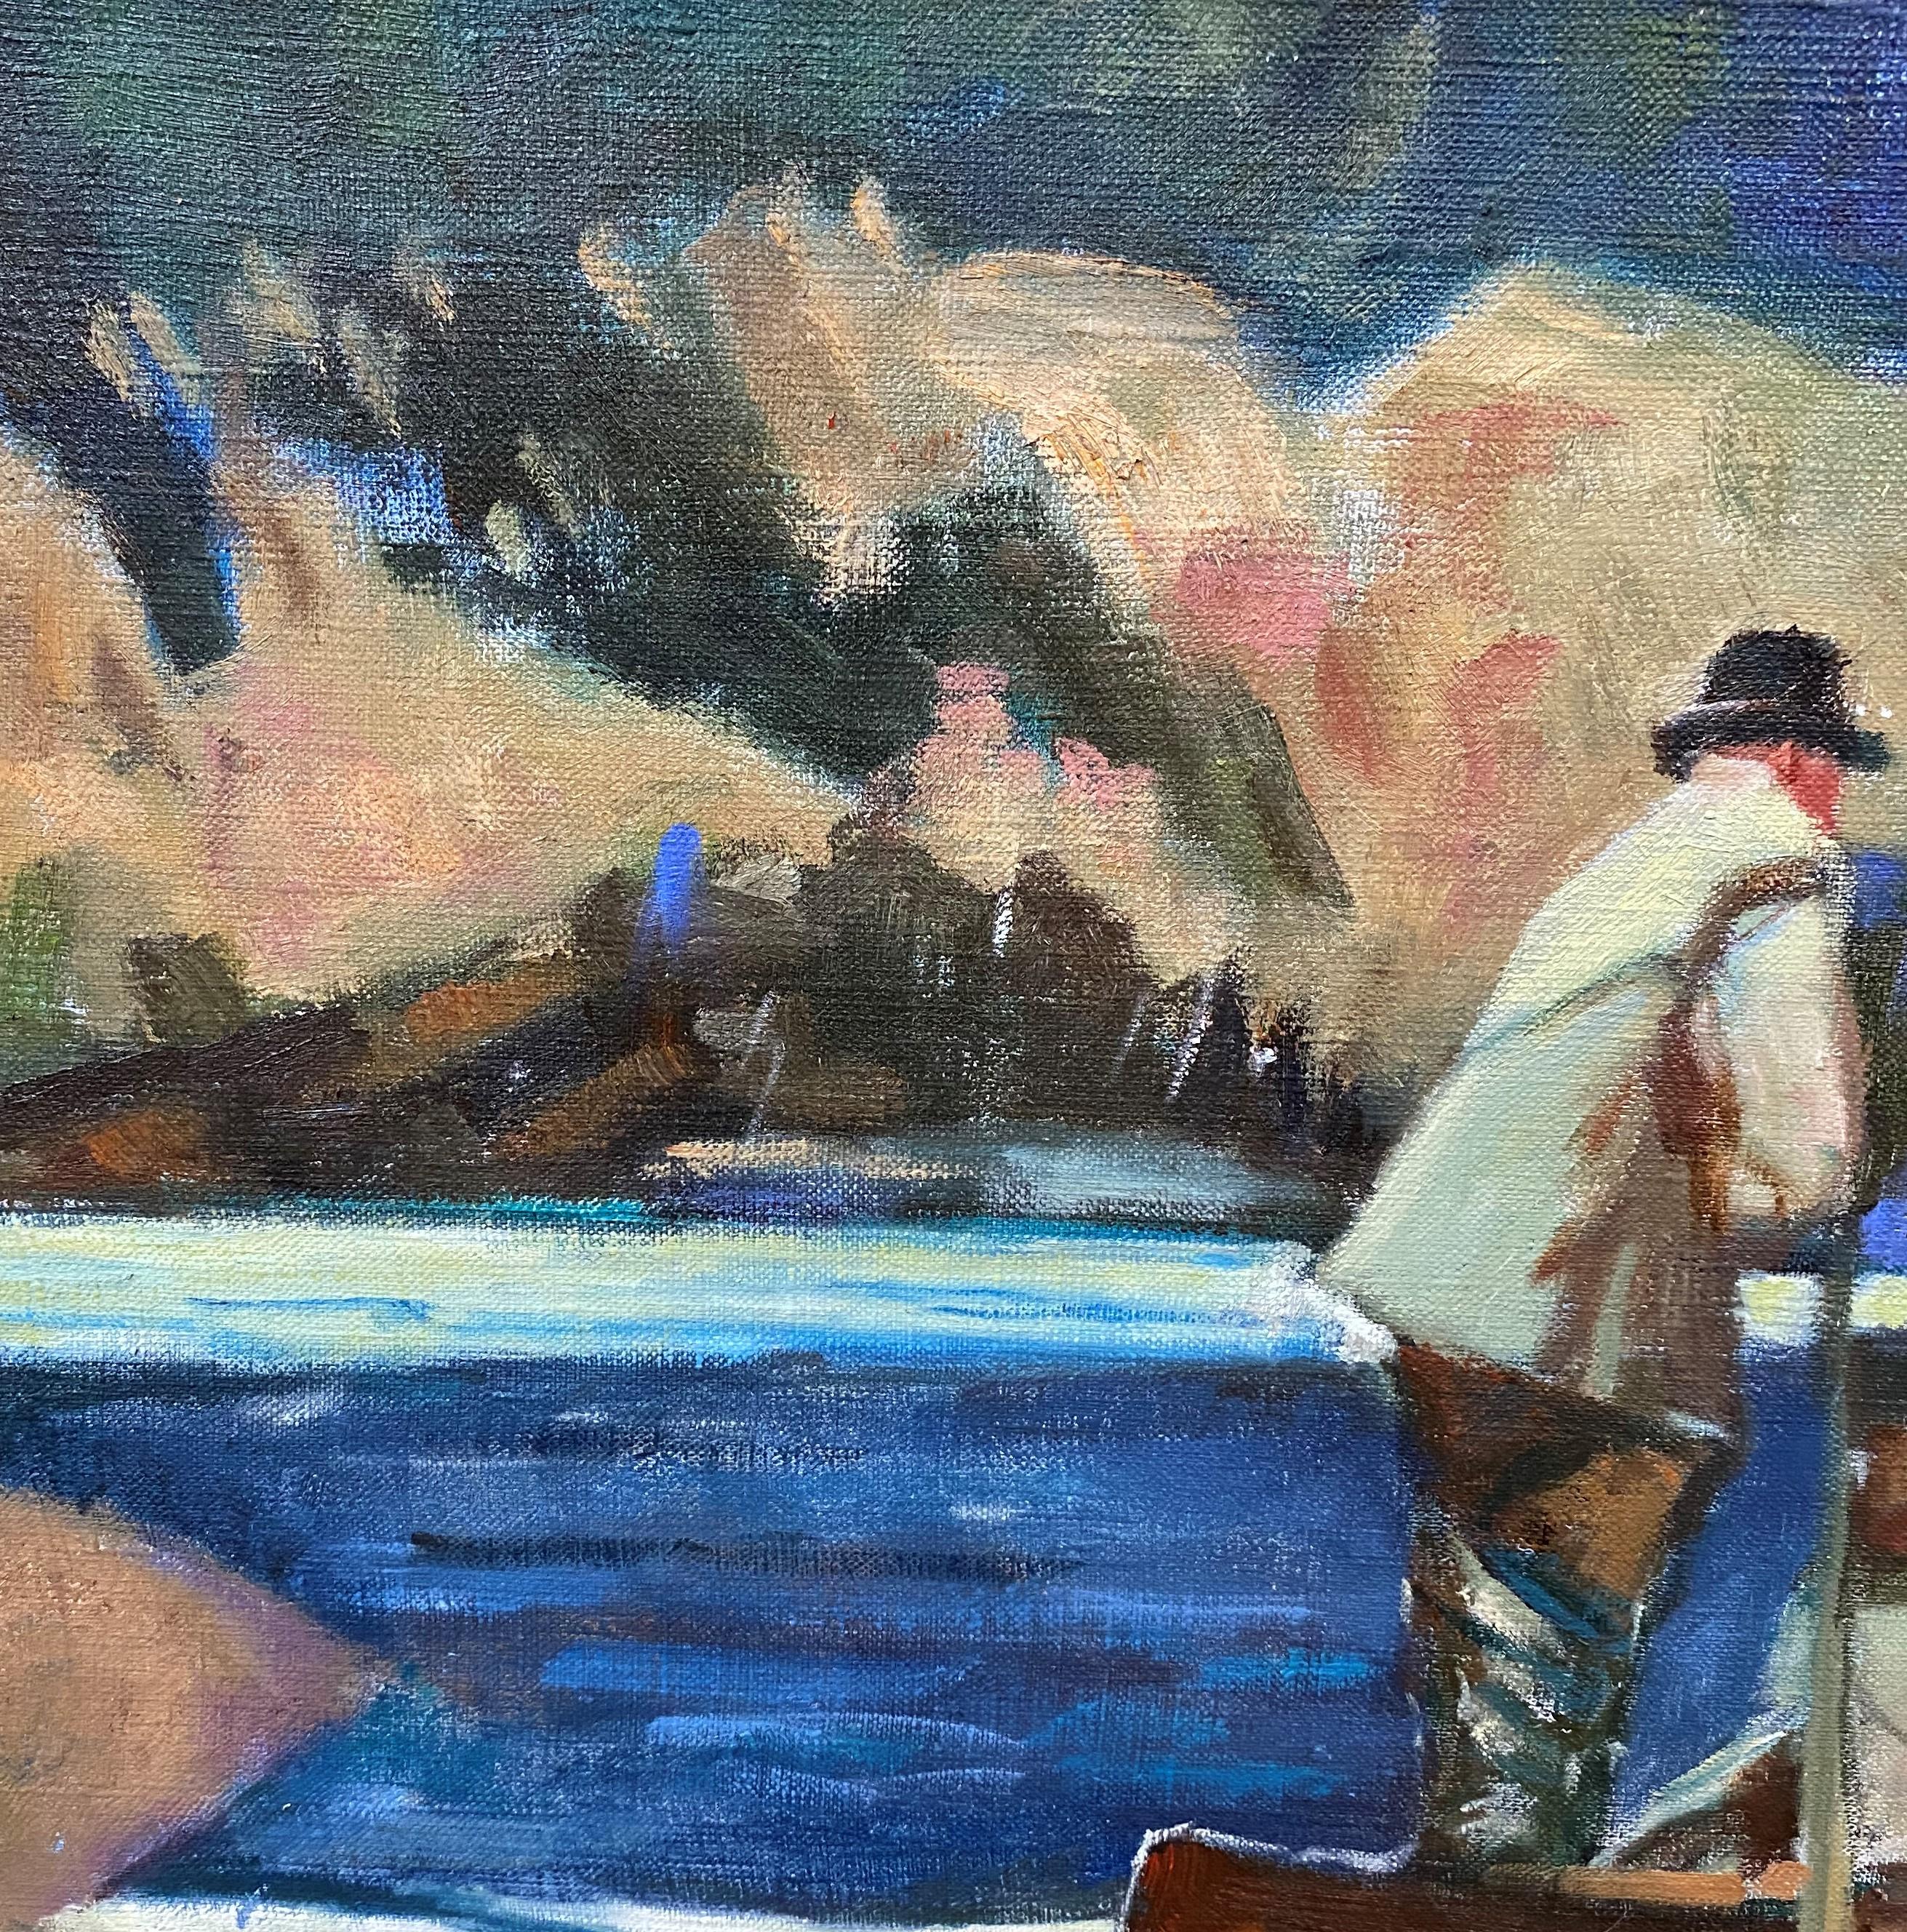 A fine impressionist sporting painting with salmon fisherman in a canoe by American artist John Whorf (1903-1959). Whorf was born in Winthrop, Massachusetts and by the age of sixteen, he had begun studies in Provincetown with George Elmer Browne and